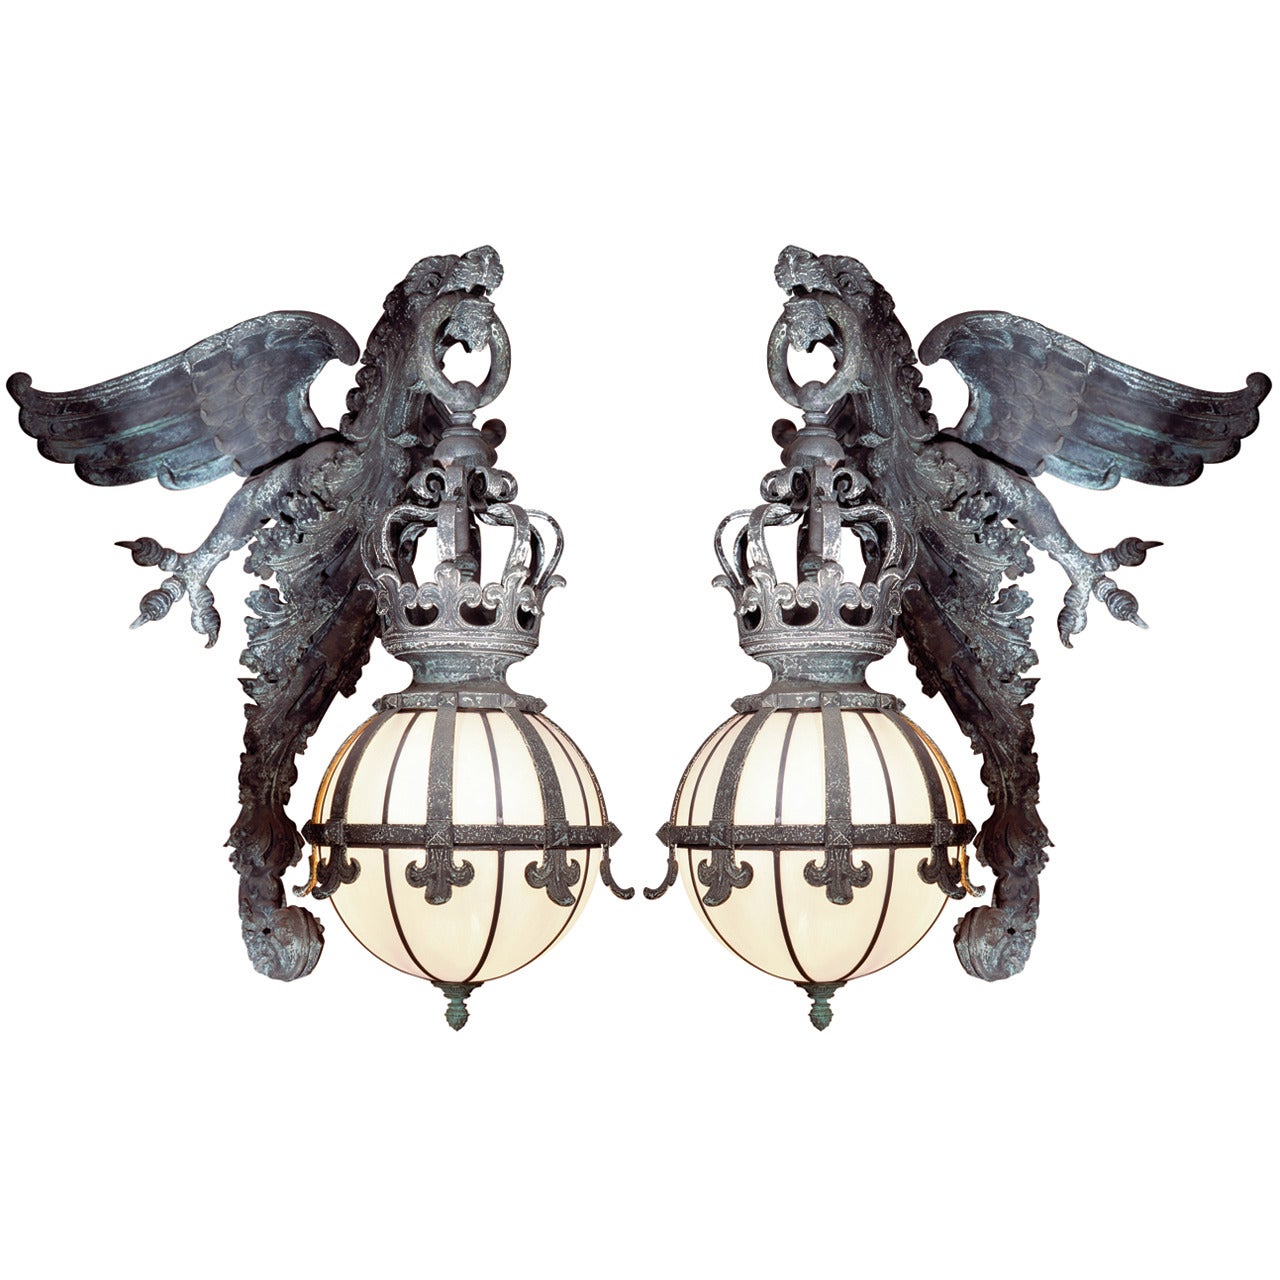 Griffin Wallmounted Lights [Pair] For Sale